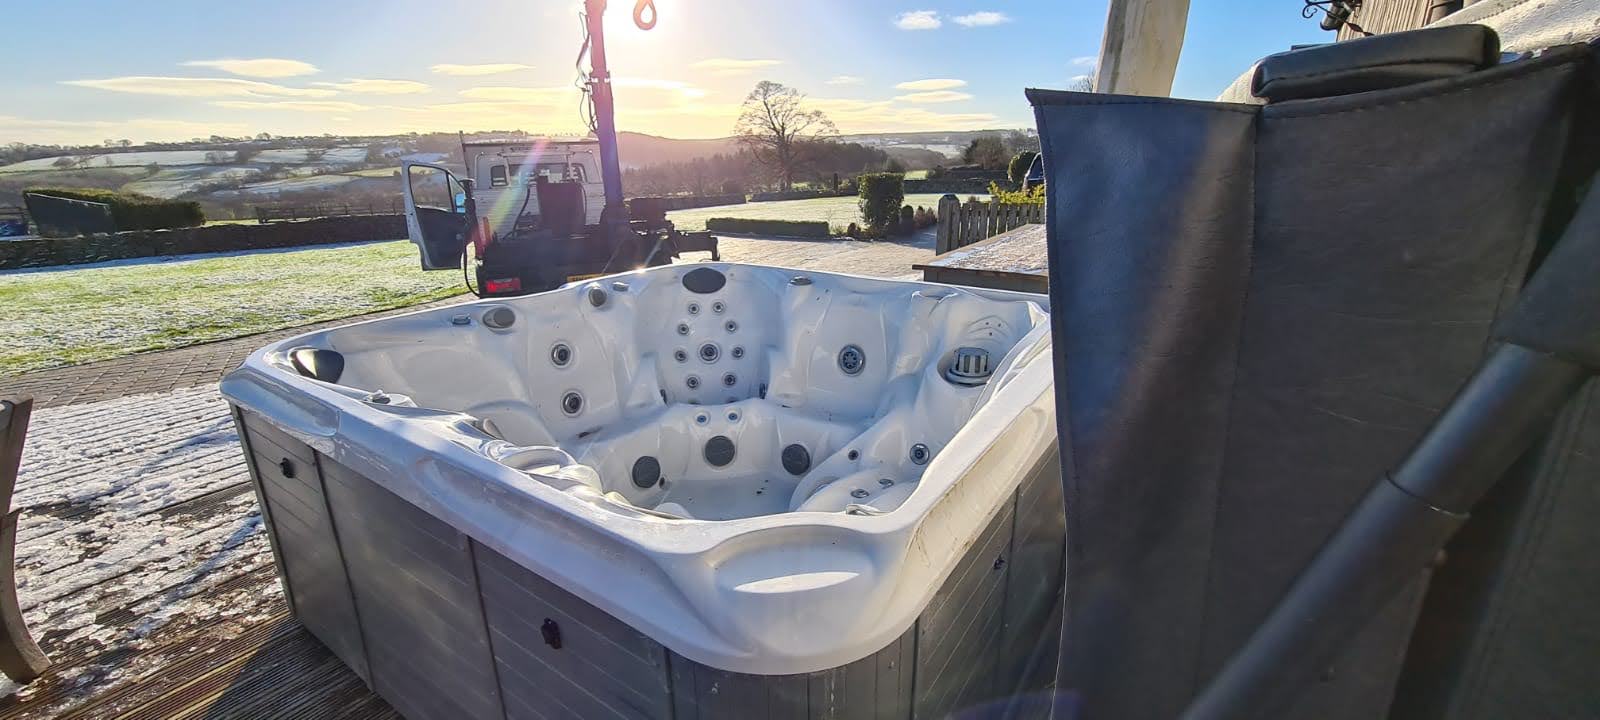 Used Hot Tubs For Sale – Second Hand Hot Tubs for Sale – We Move Them All